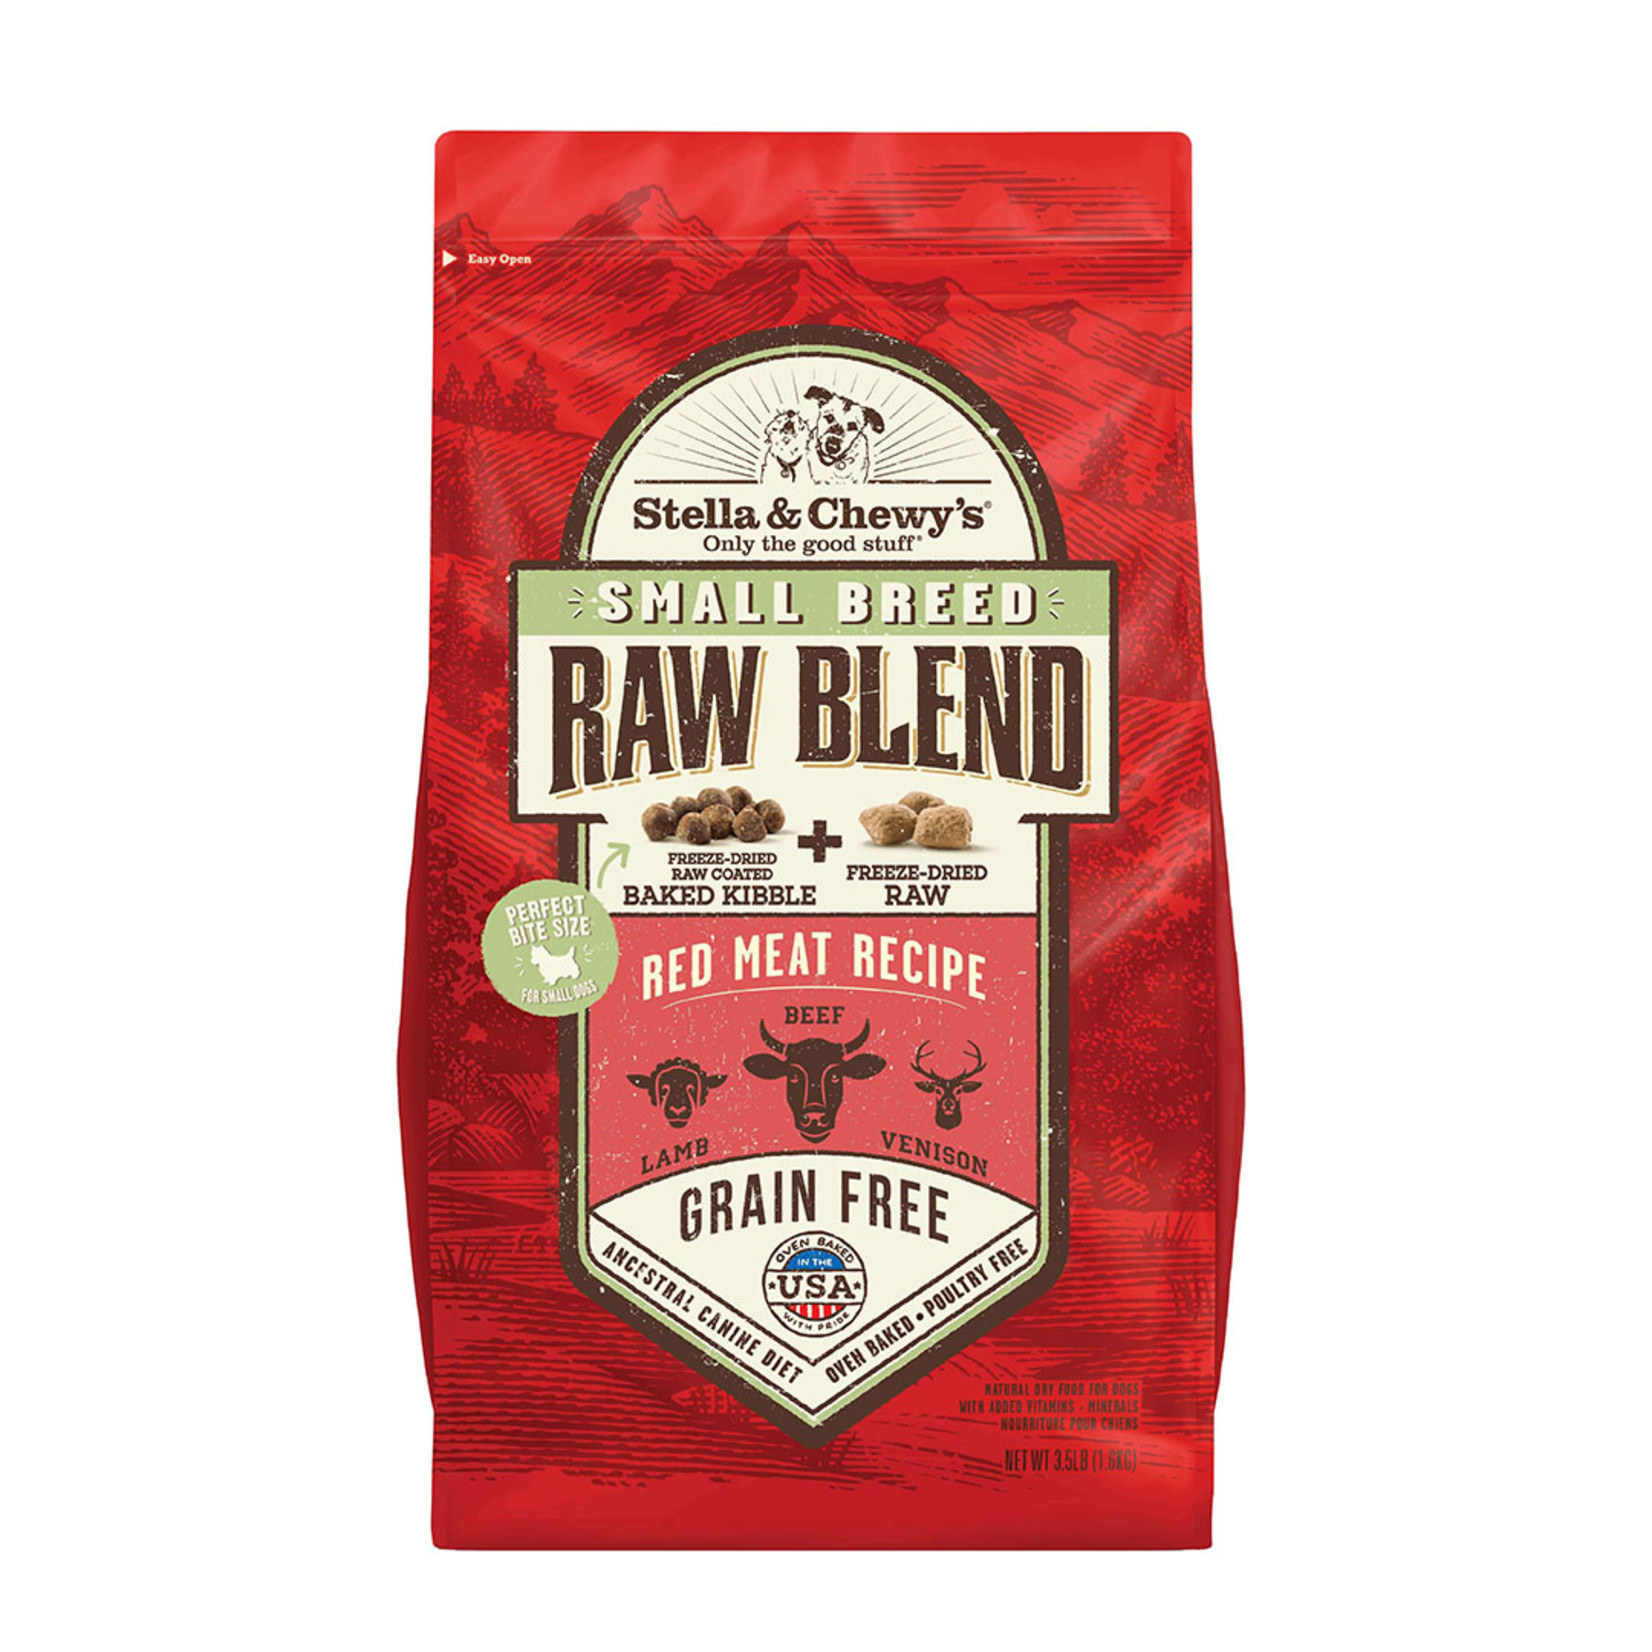 Stella & Chewys Stella & Chewy's Raw Blend Small Breed Red Meat Dog Food